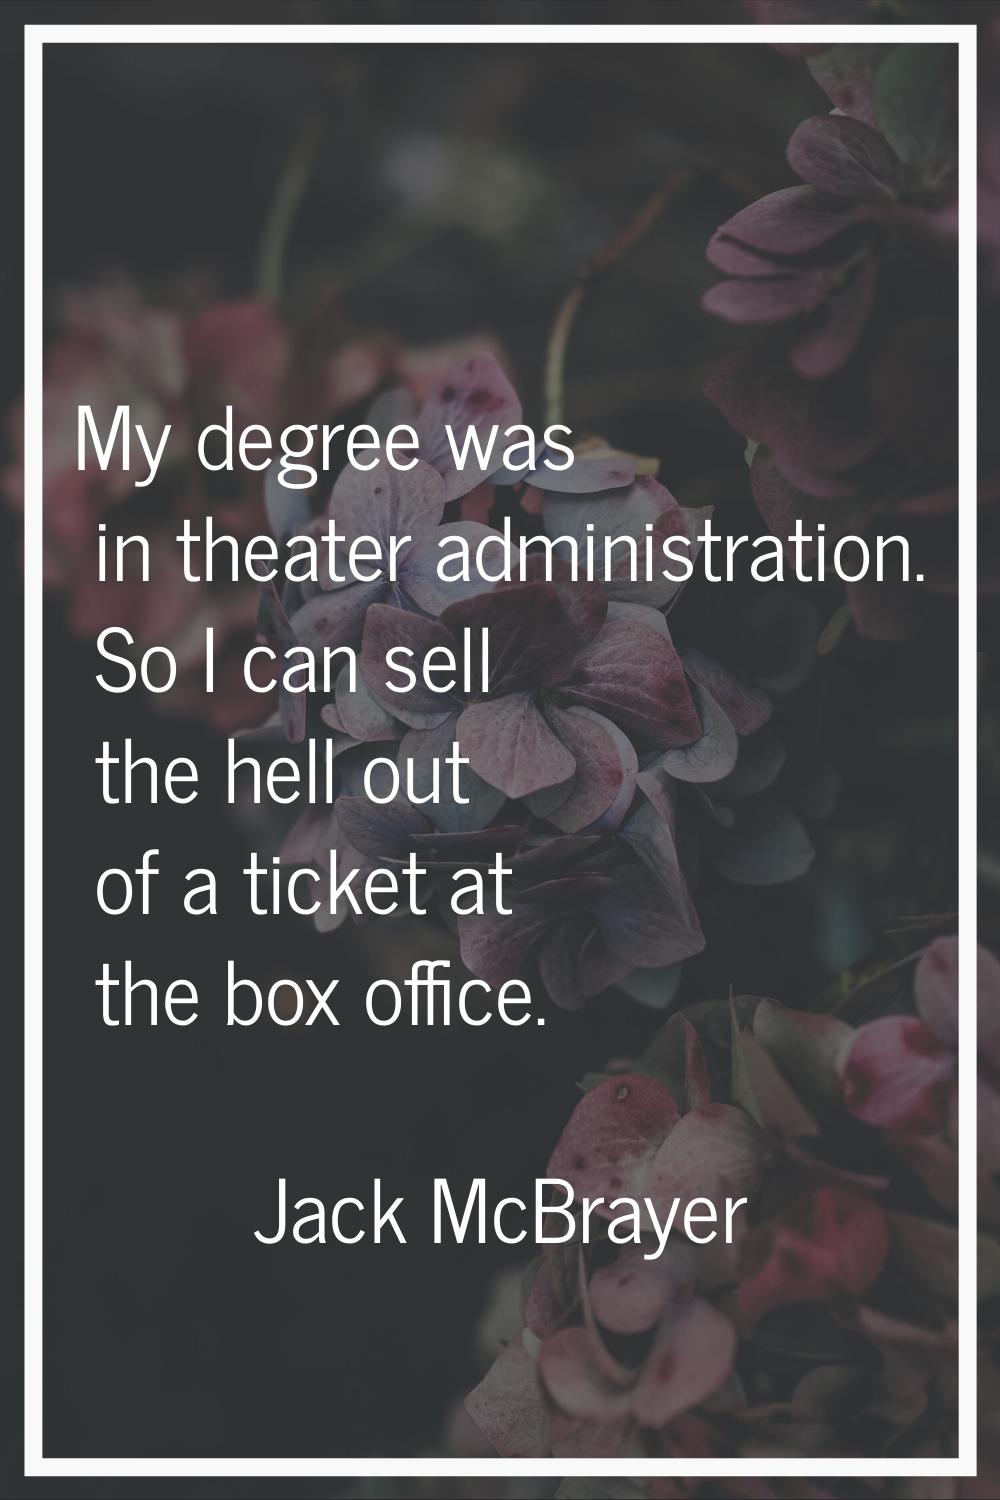 My degree was in theater administration. So I can sell the hell out of a ticket at the box office.